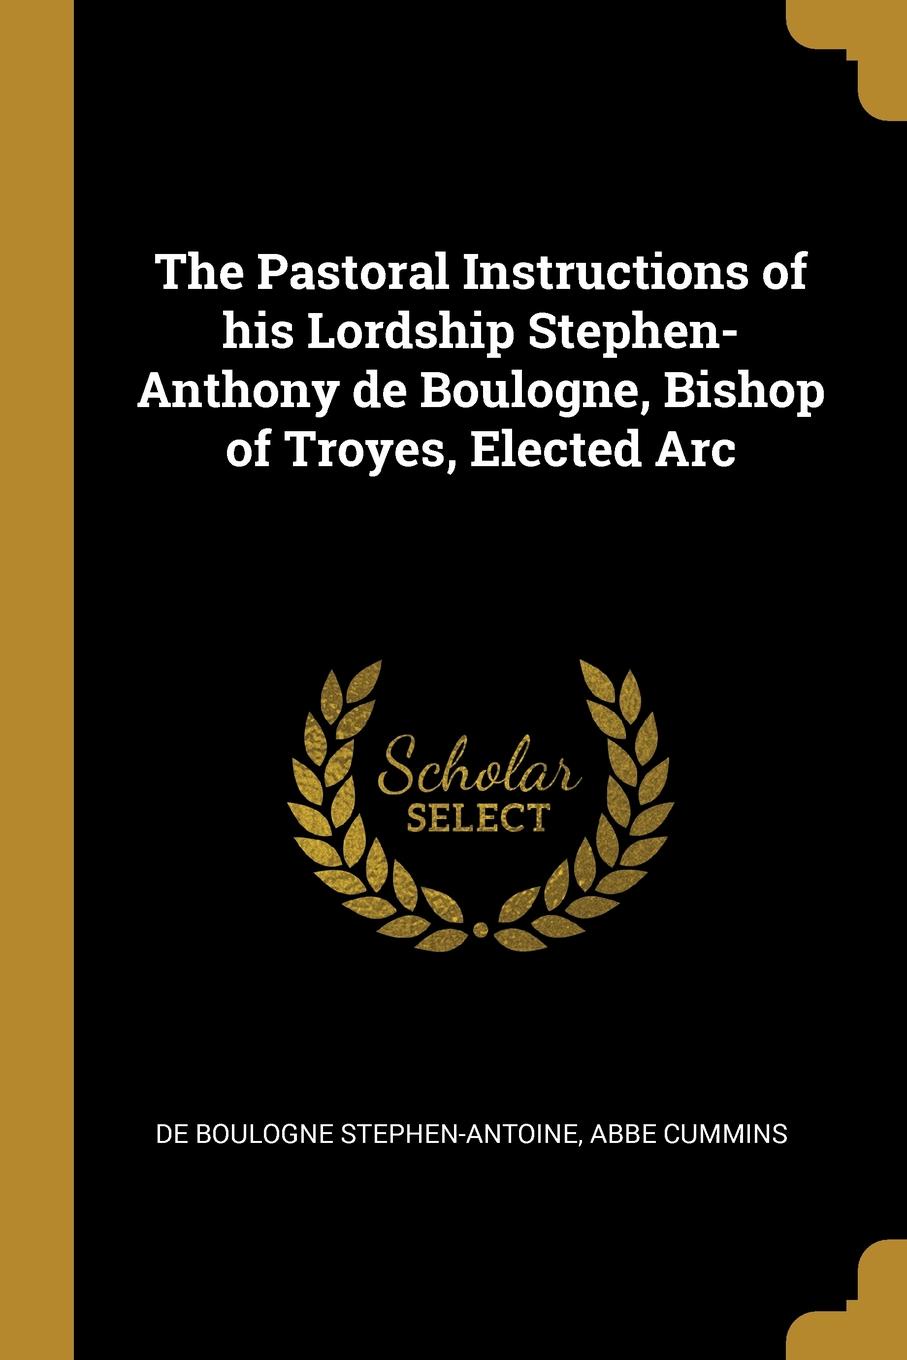 The Pastoral Instructions of his Lordship Stephen-Anthony de Boulogne, Bishop of Troyes, Elected Arc